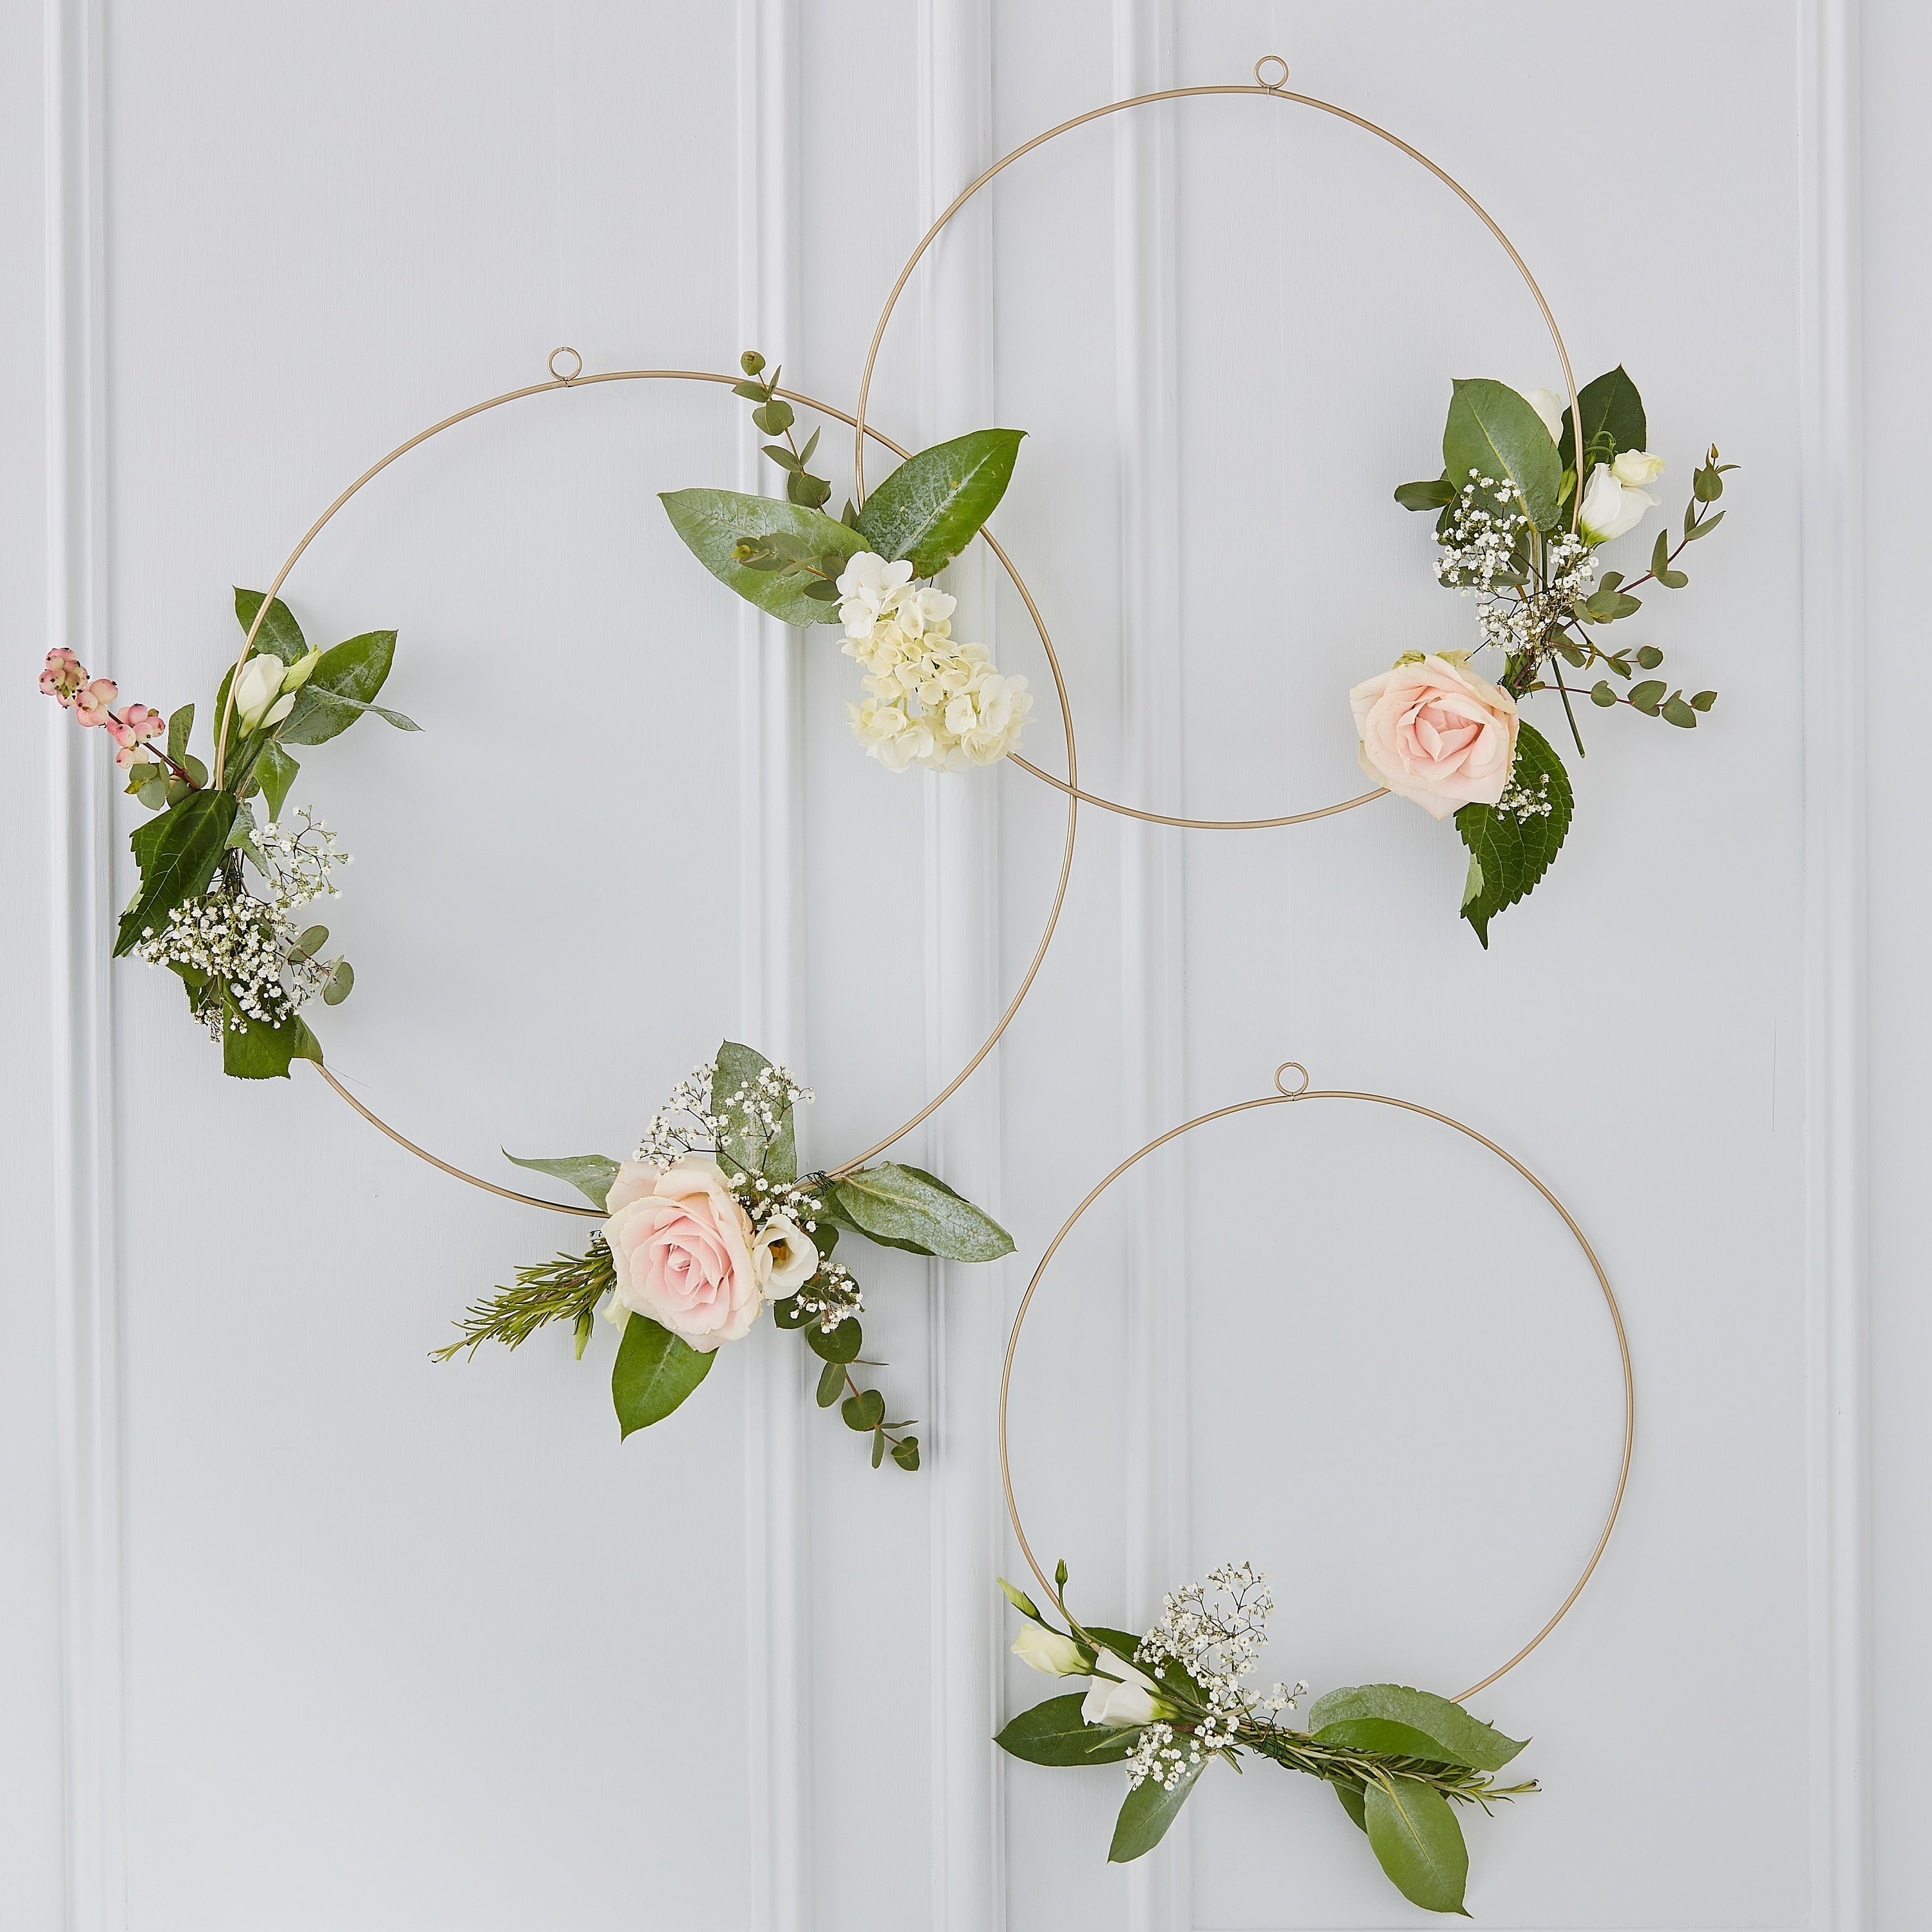 Details about   Floral Hoop Artificial Flower Wreath Triangle Metal DIY Wedding Party Hanging US 